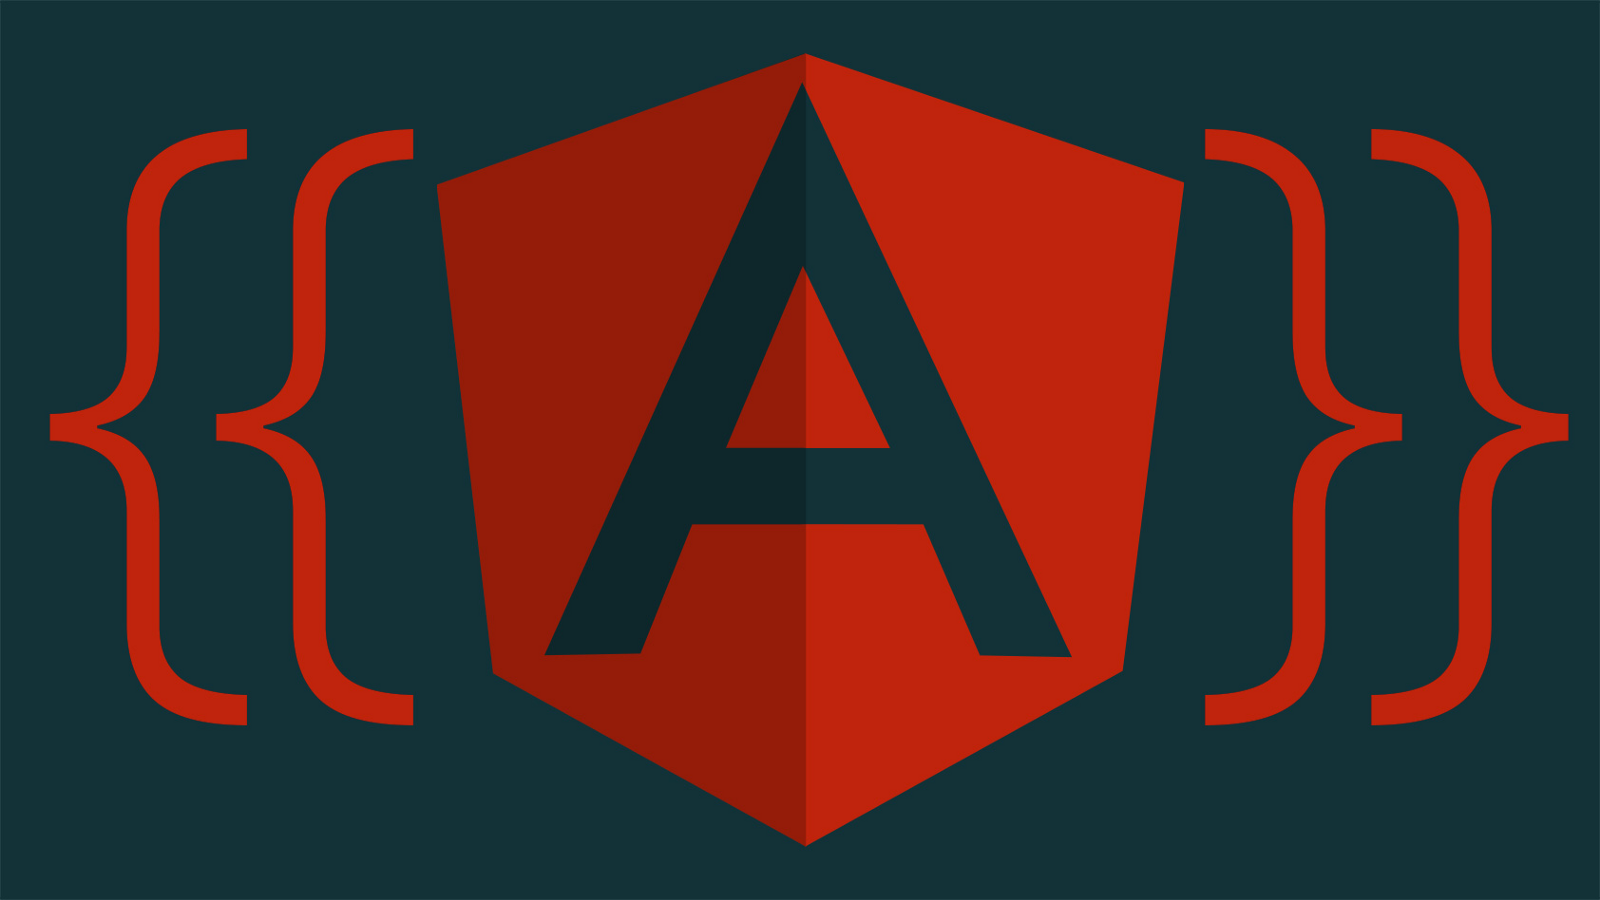 New Features of Angular 8